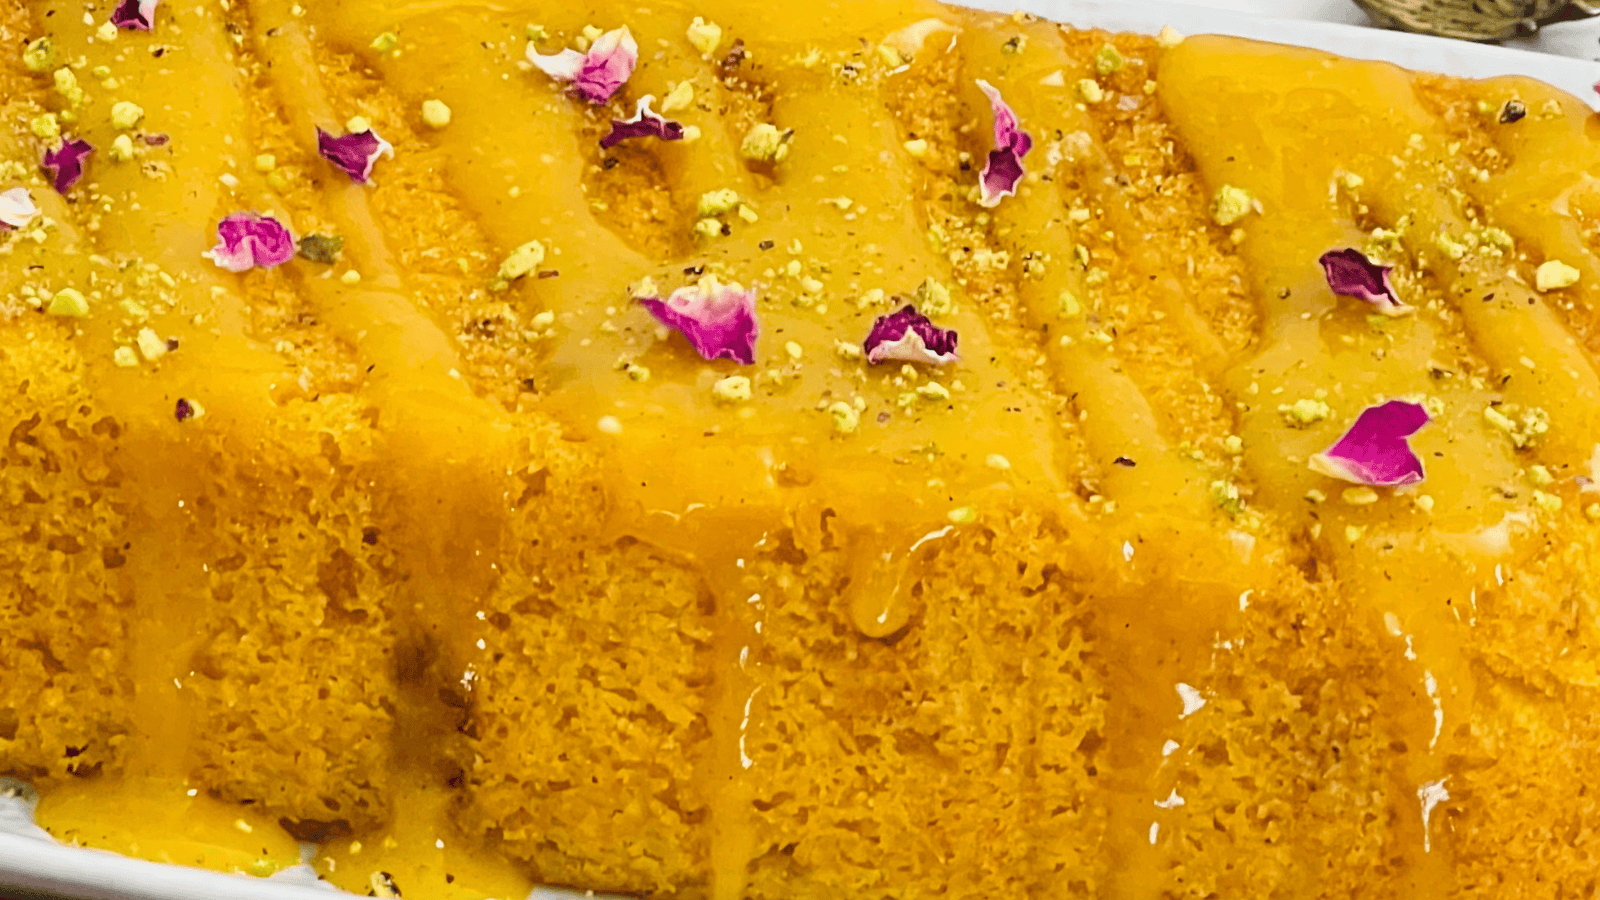 Close-up of a vibrant orange dessert garnished with flower petals and nuts, drizzled with syrup on a white rectangular plate.